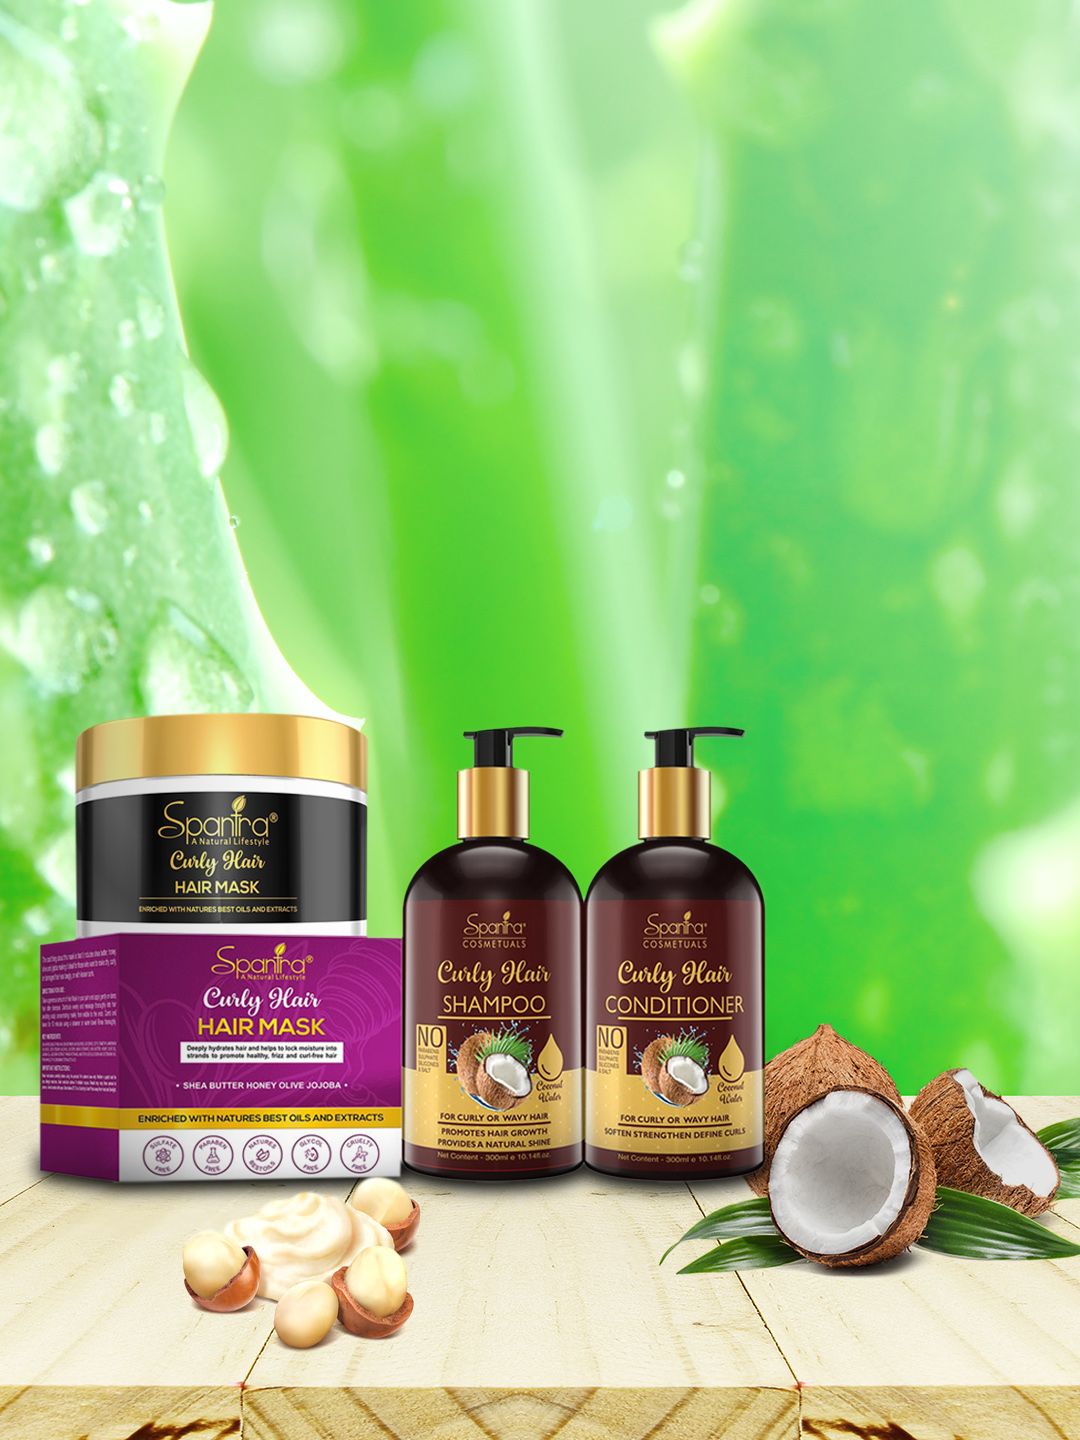 Spantra Set of Curly Hair Coconut Shampoo & Conditioner with Hair Mask Price in India